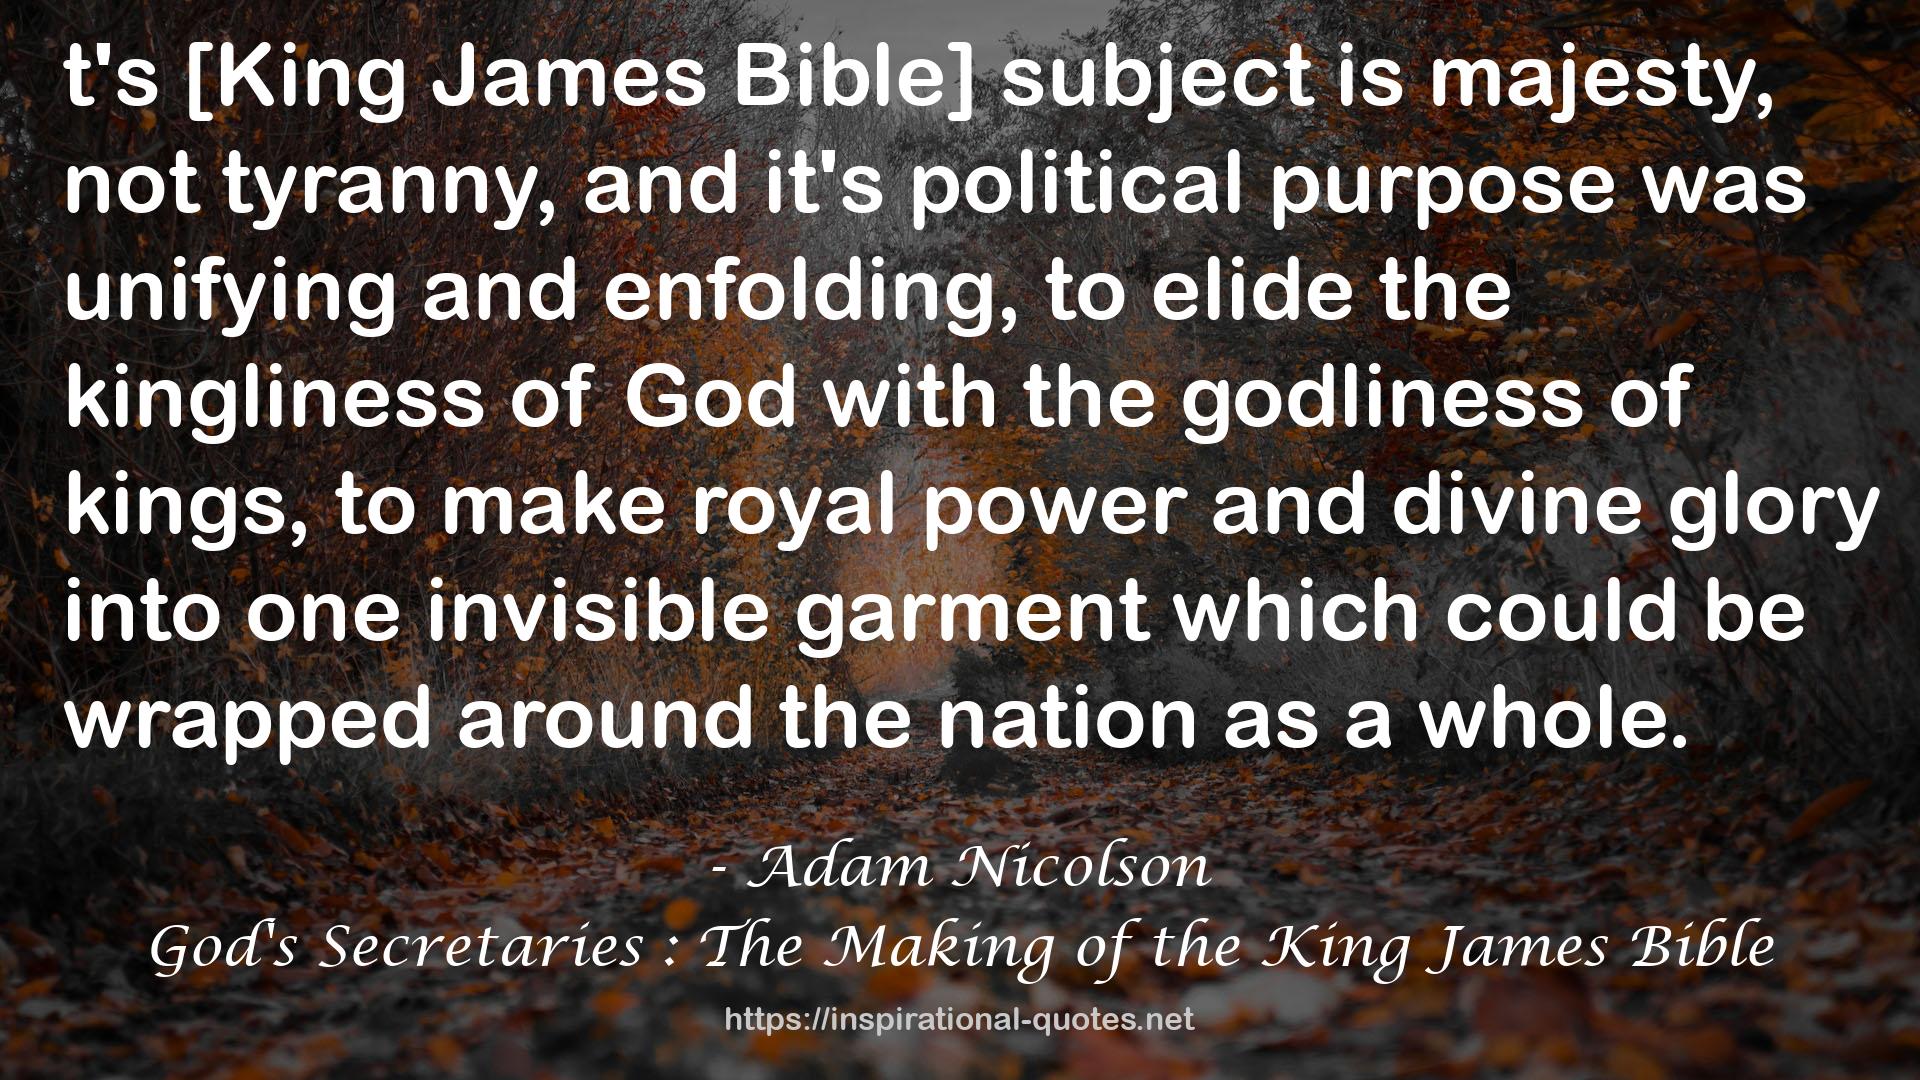 God's Secretaries : The Making of the King James Bible QUOTES